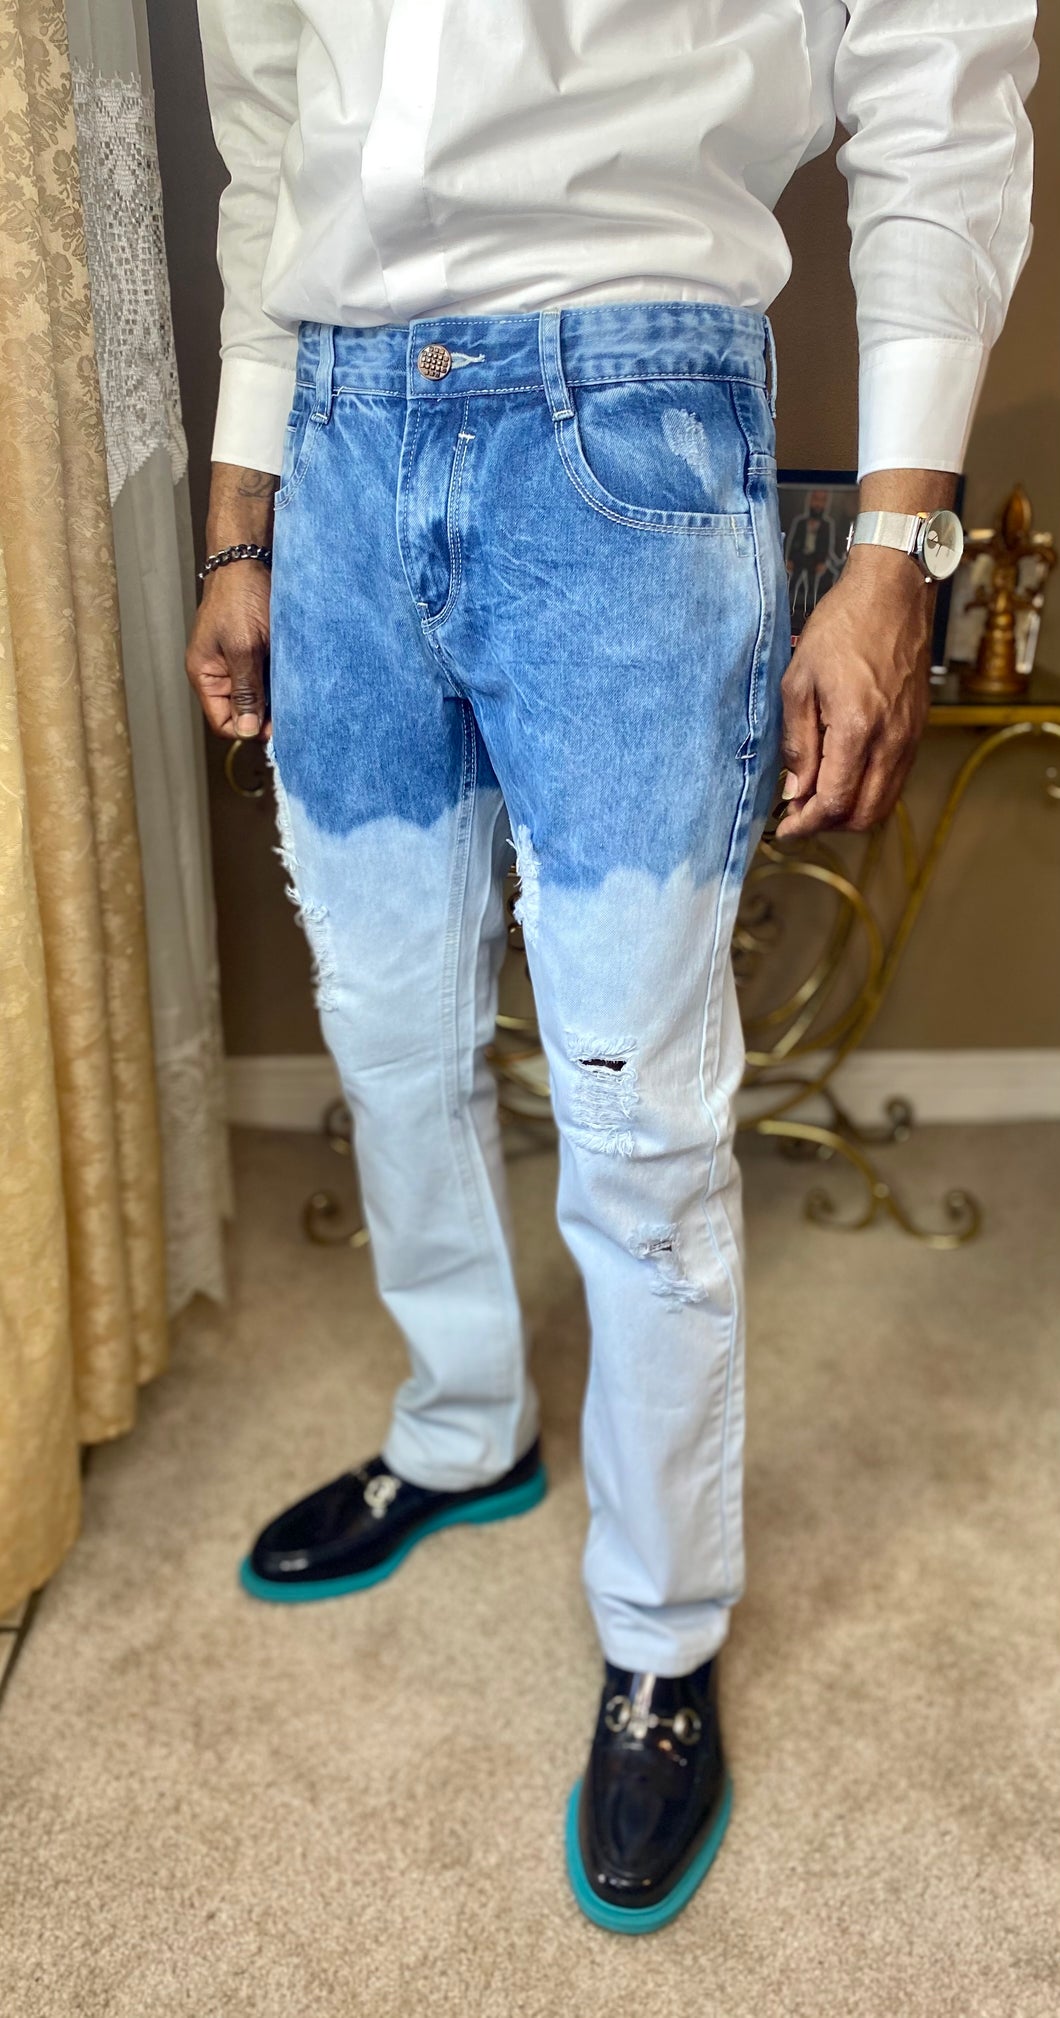 Two Toned Denim Jeans (34/36)